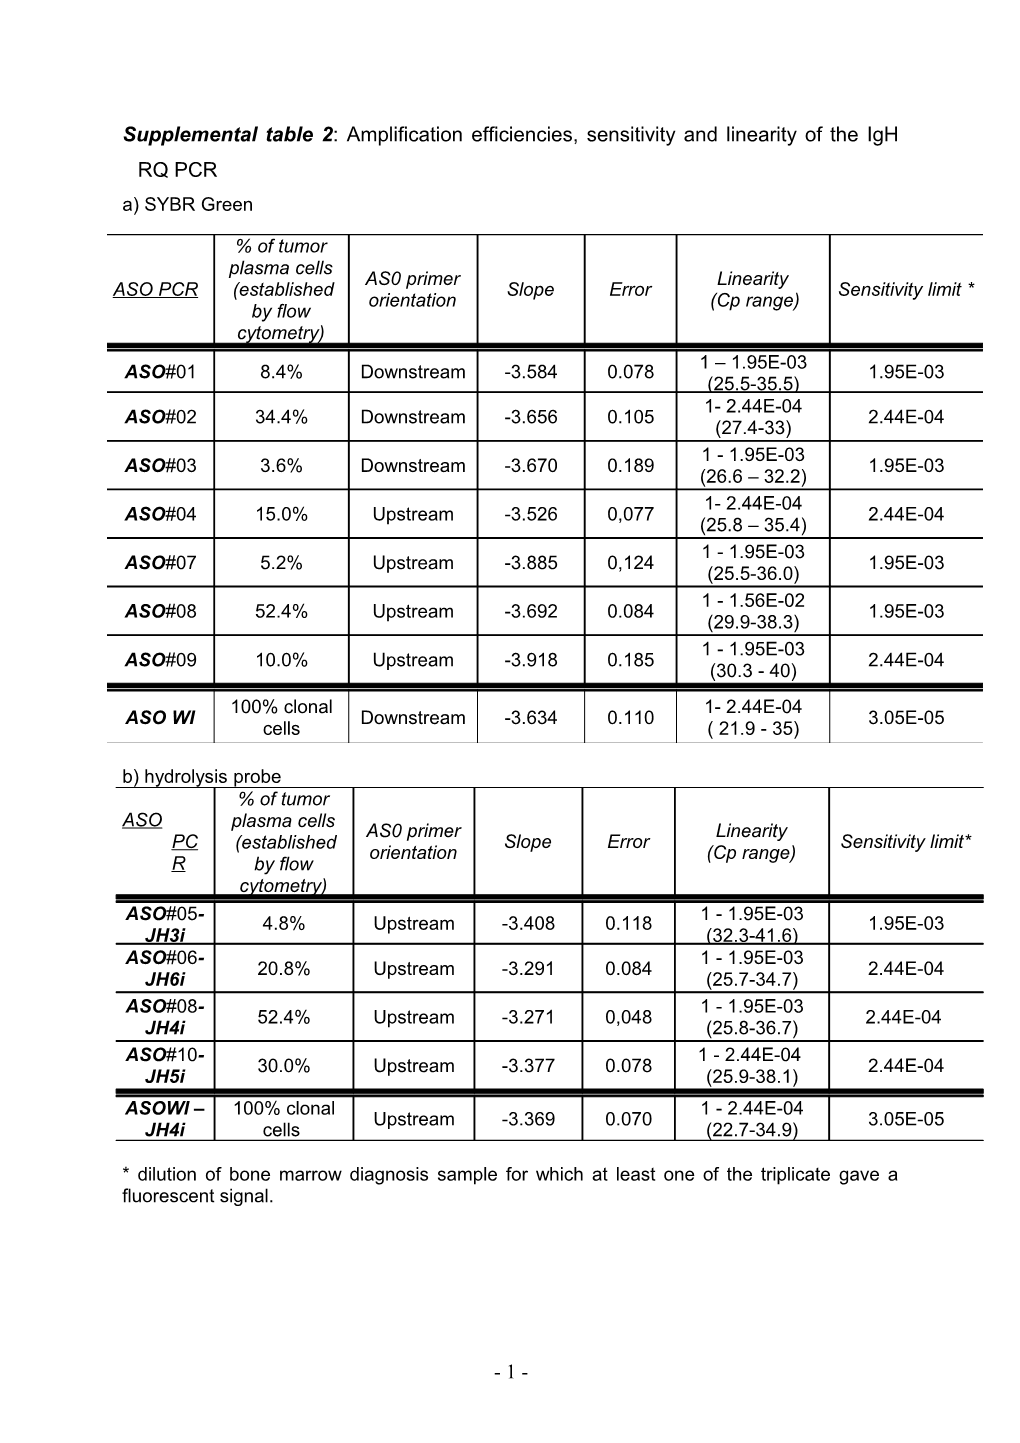 Table 3 : Amplification Efficiencies, Sensitivity and Linearity of the RQ-PCR